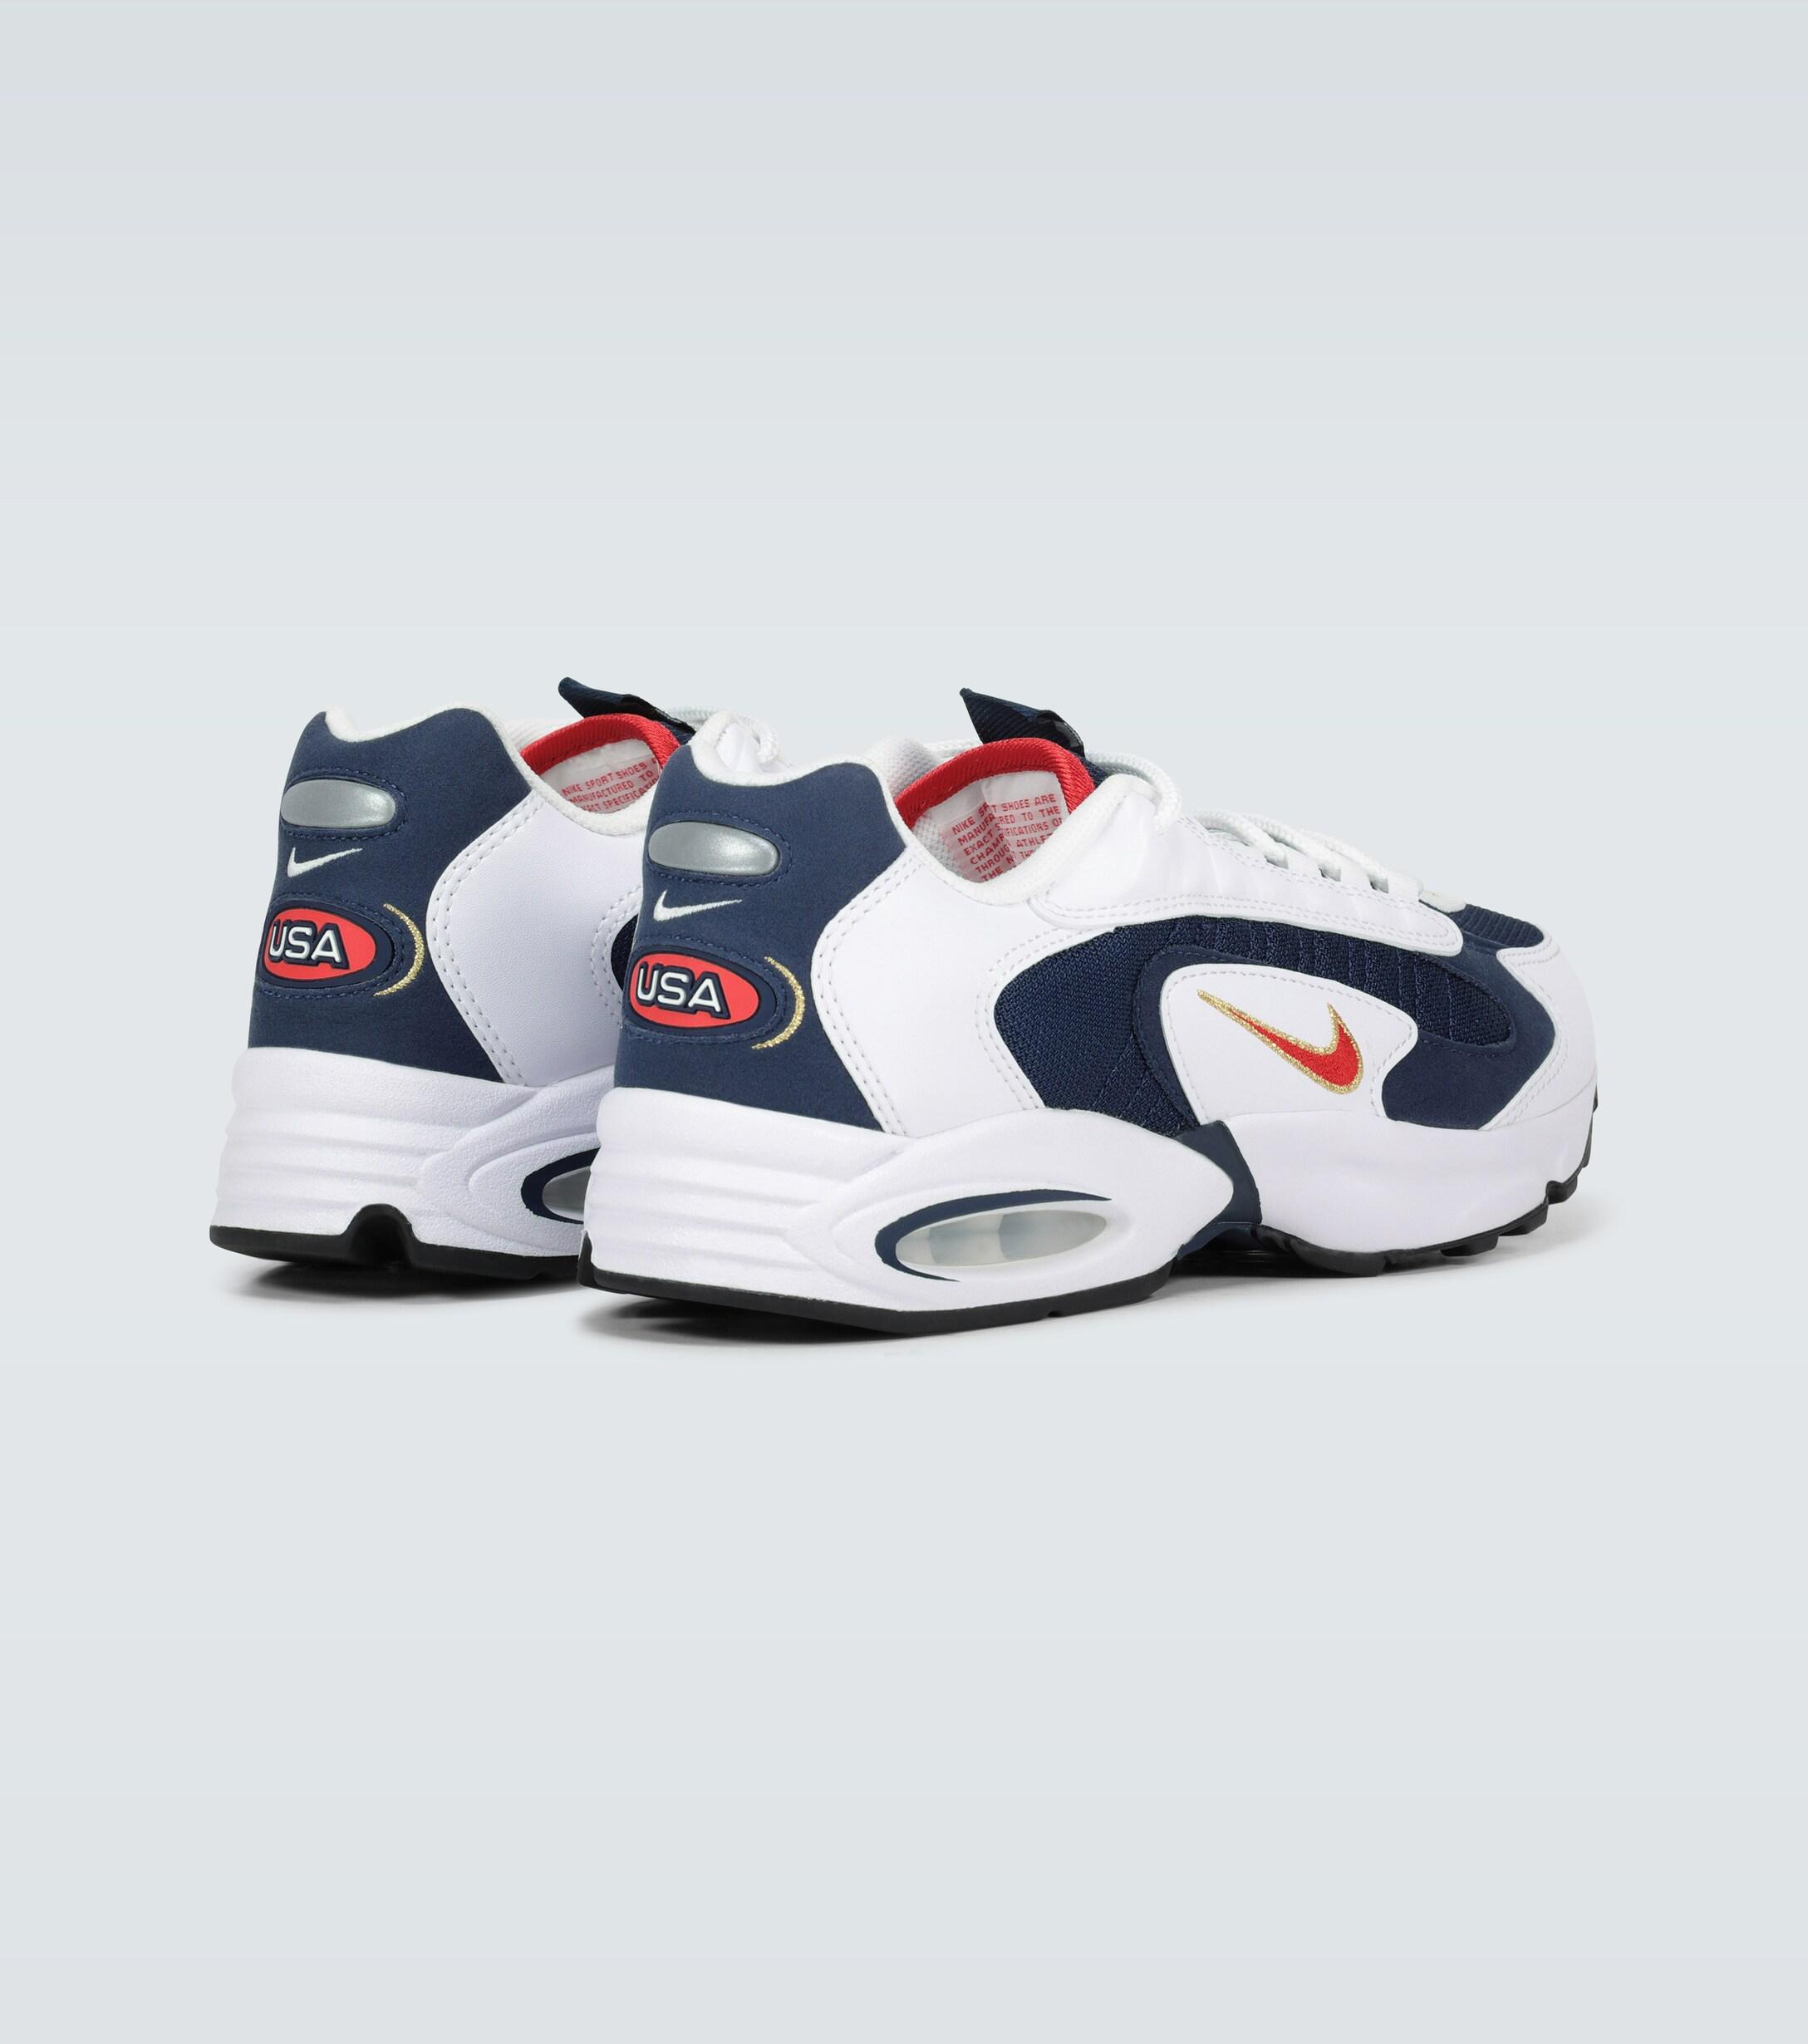 Nike Synthetic Air Max Triax Usa Shoe in Midnight Navy/University Red  (Blue) for Men - Save 61% | Lyst